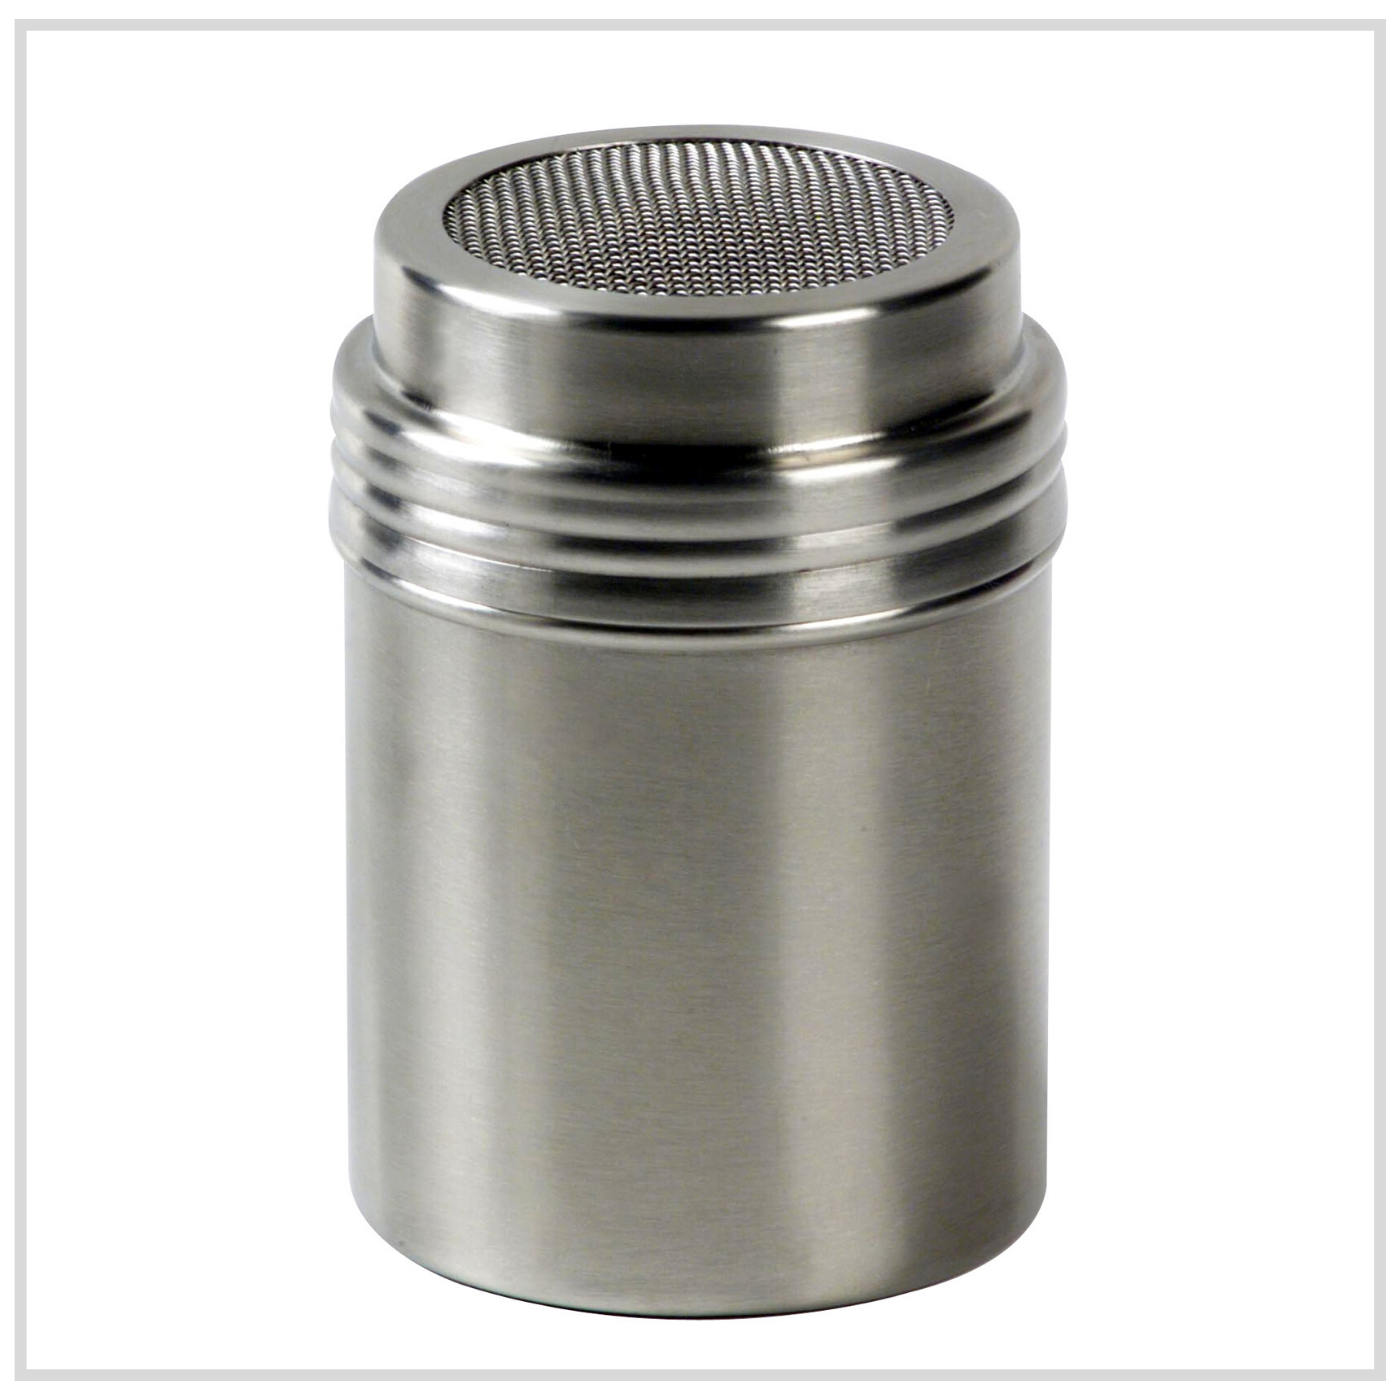 Ilsa Stainless Steel Sugar Shaker with Mesh